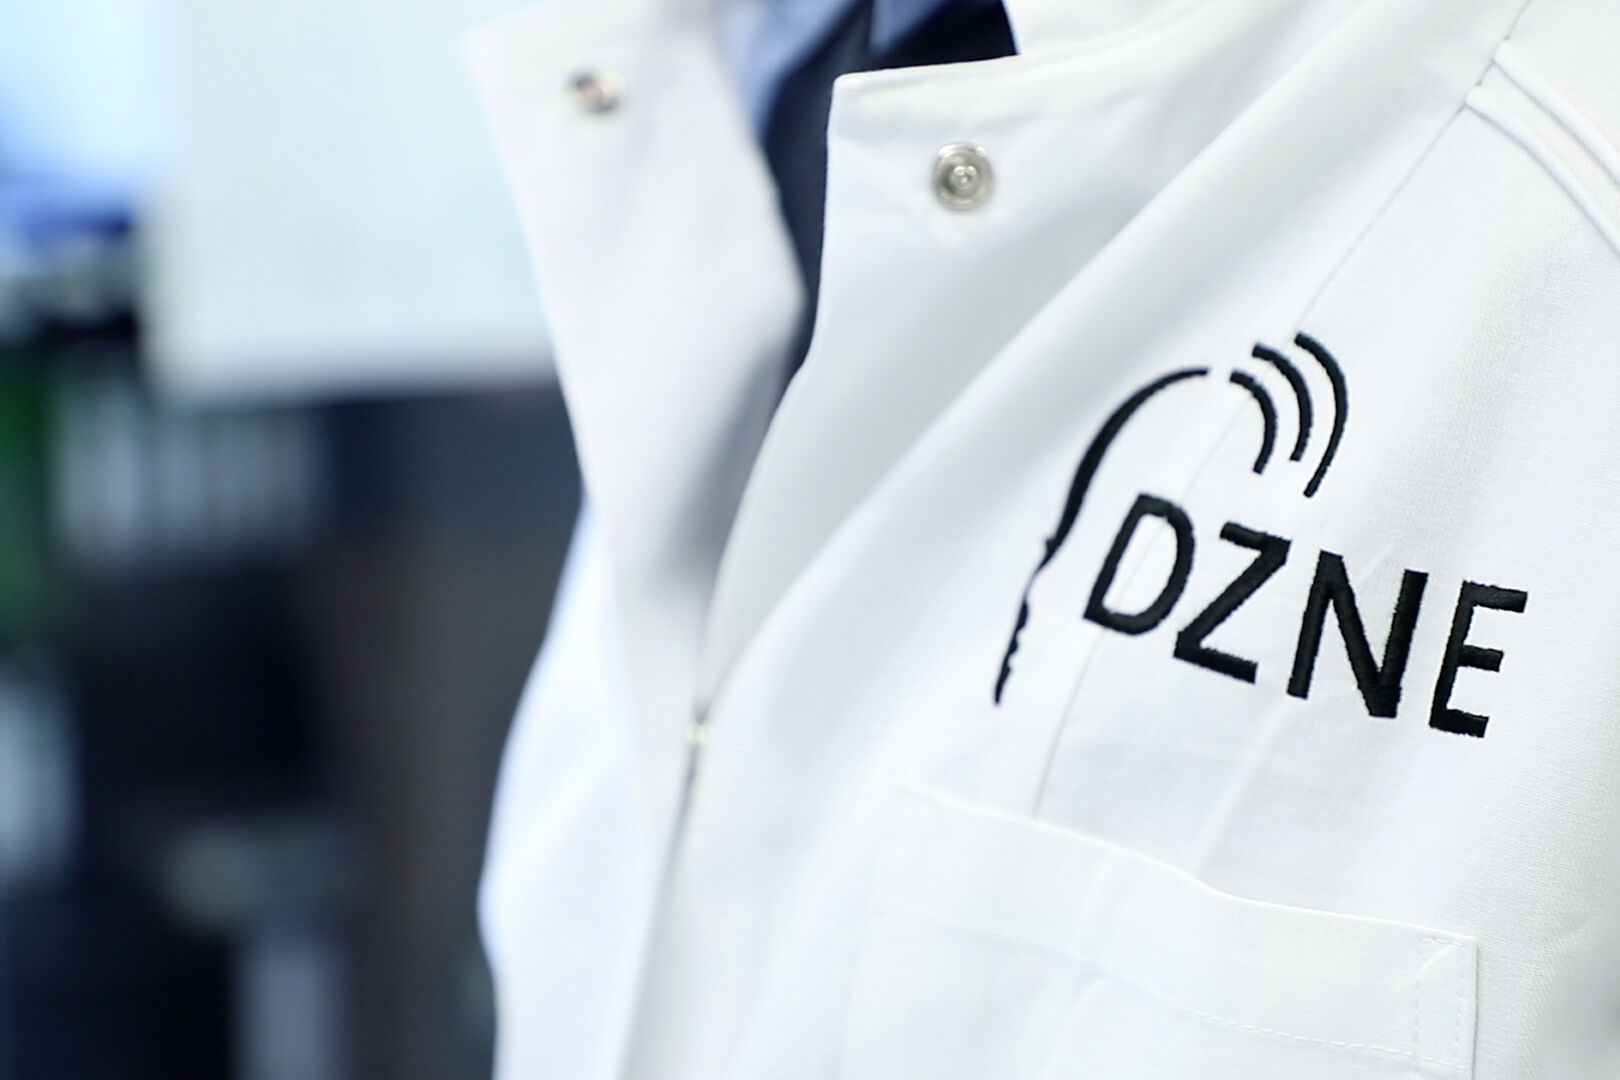 Picture shows lab coat with DZNE logo.